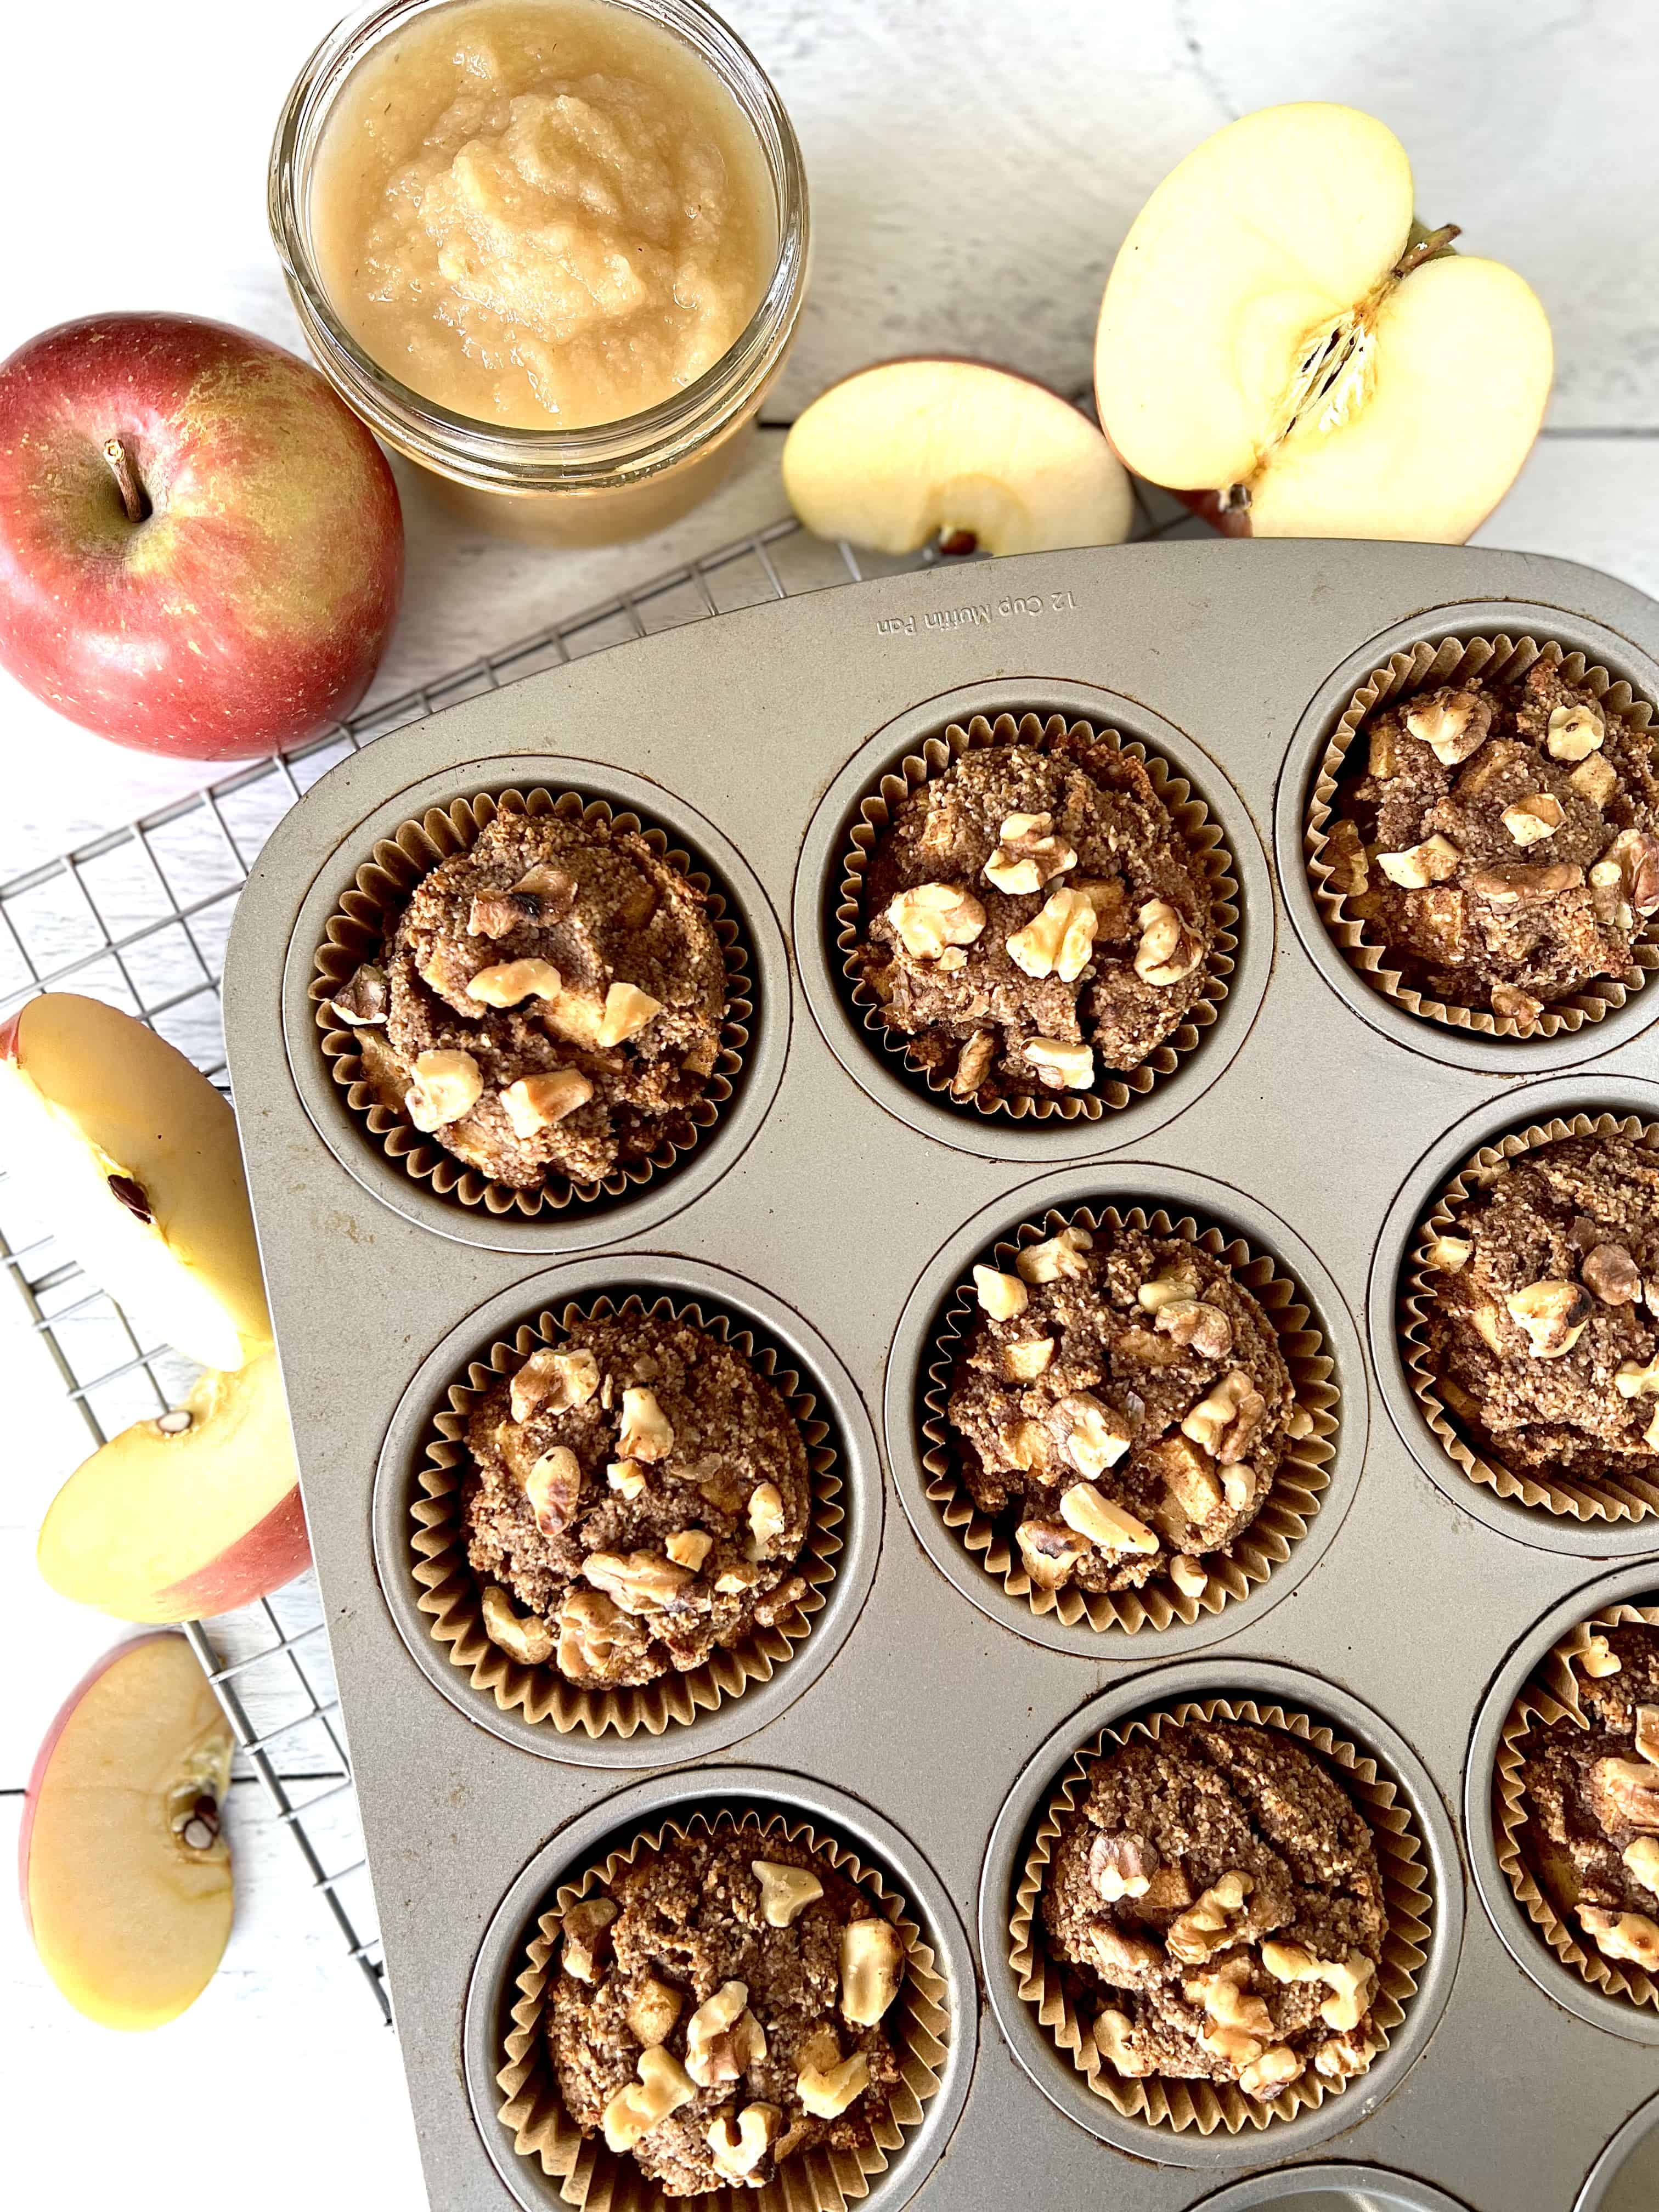 gluten-free apple muffins made with almond flour sitting in a metal muffin pan on a cooling rack surrounded by apple slices, an apple and a jar of applesauce